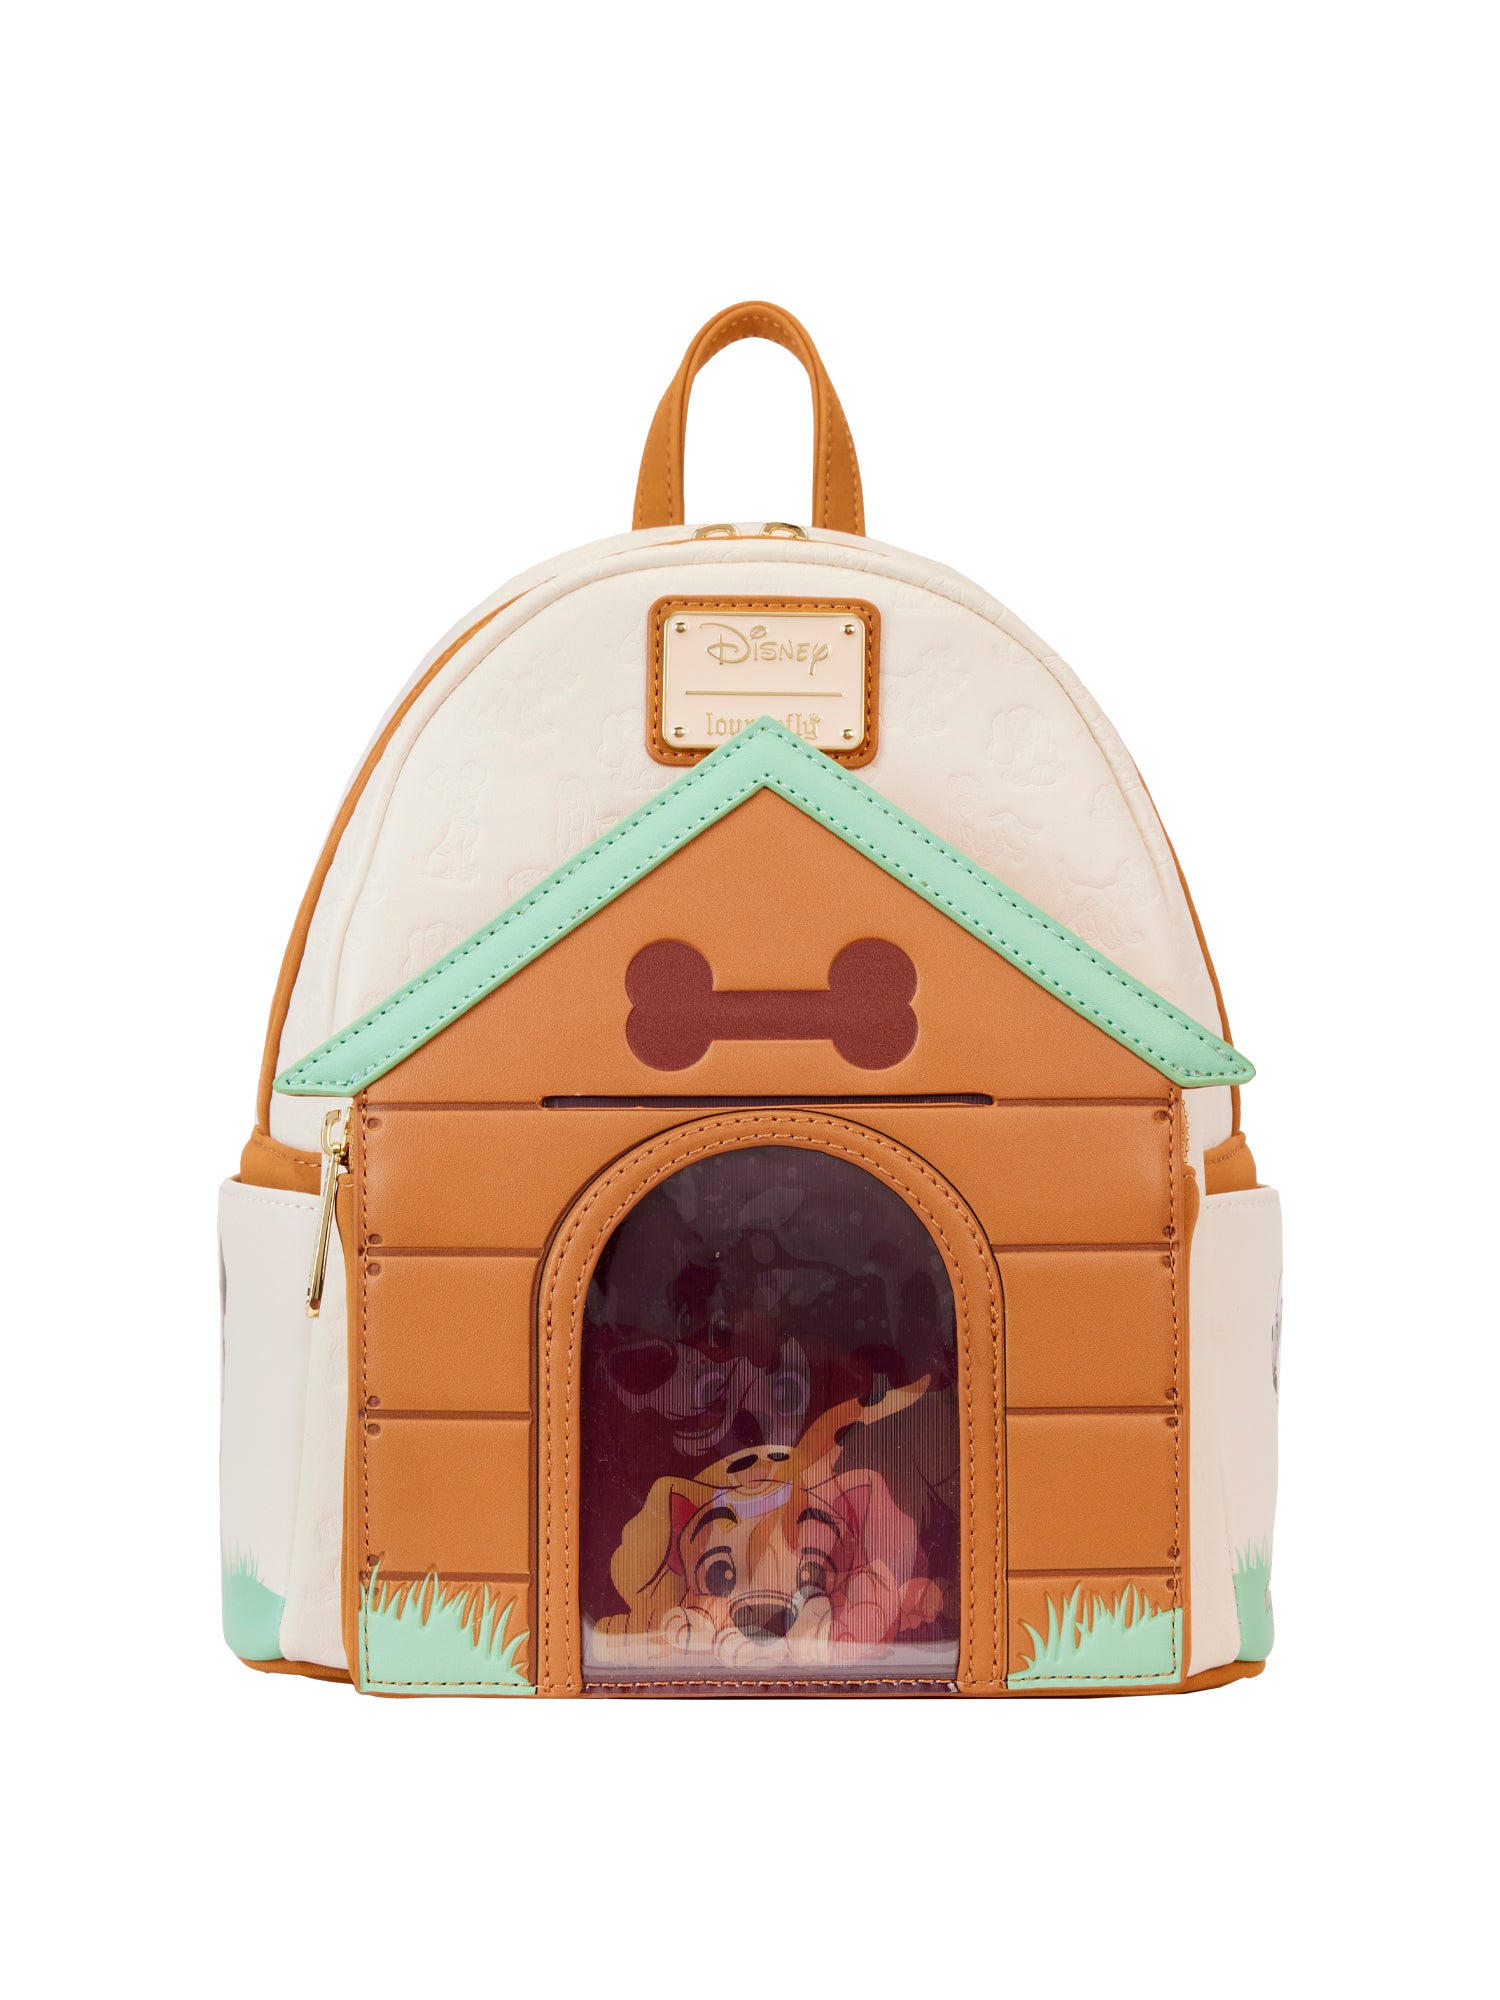 Loungefly x Disney Dogs Triple Lenticular Display Backpack Lady Tramp